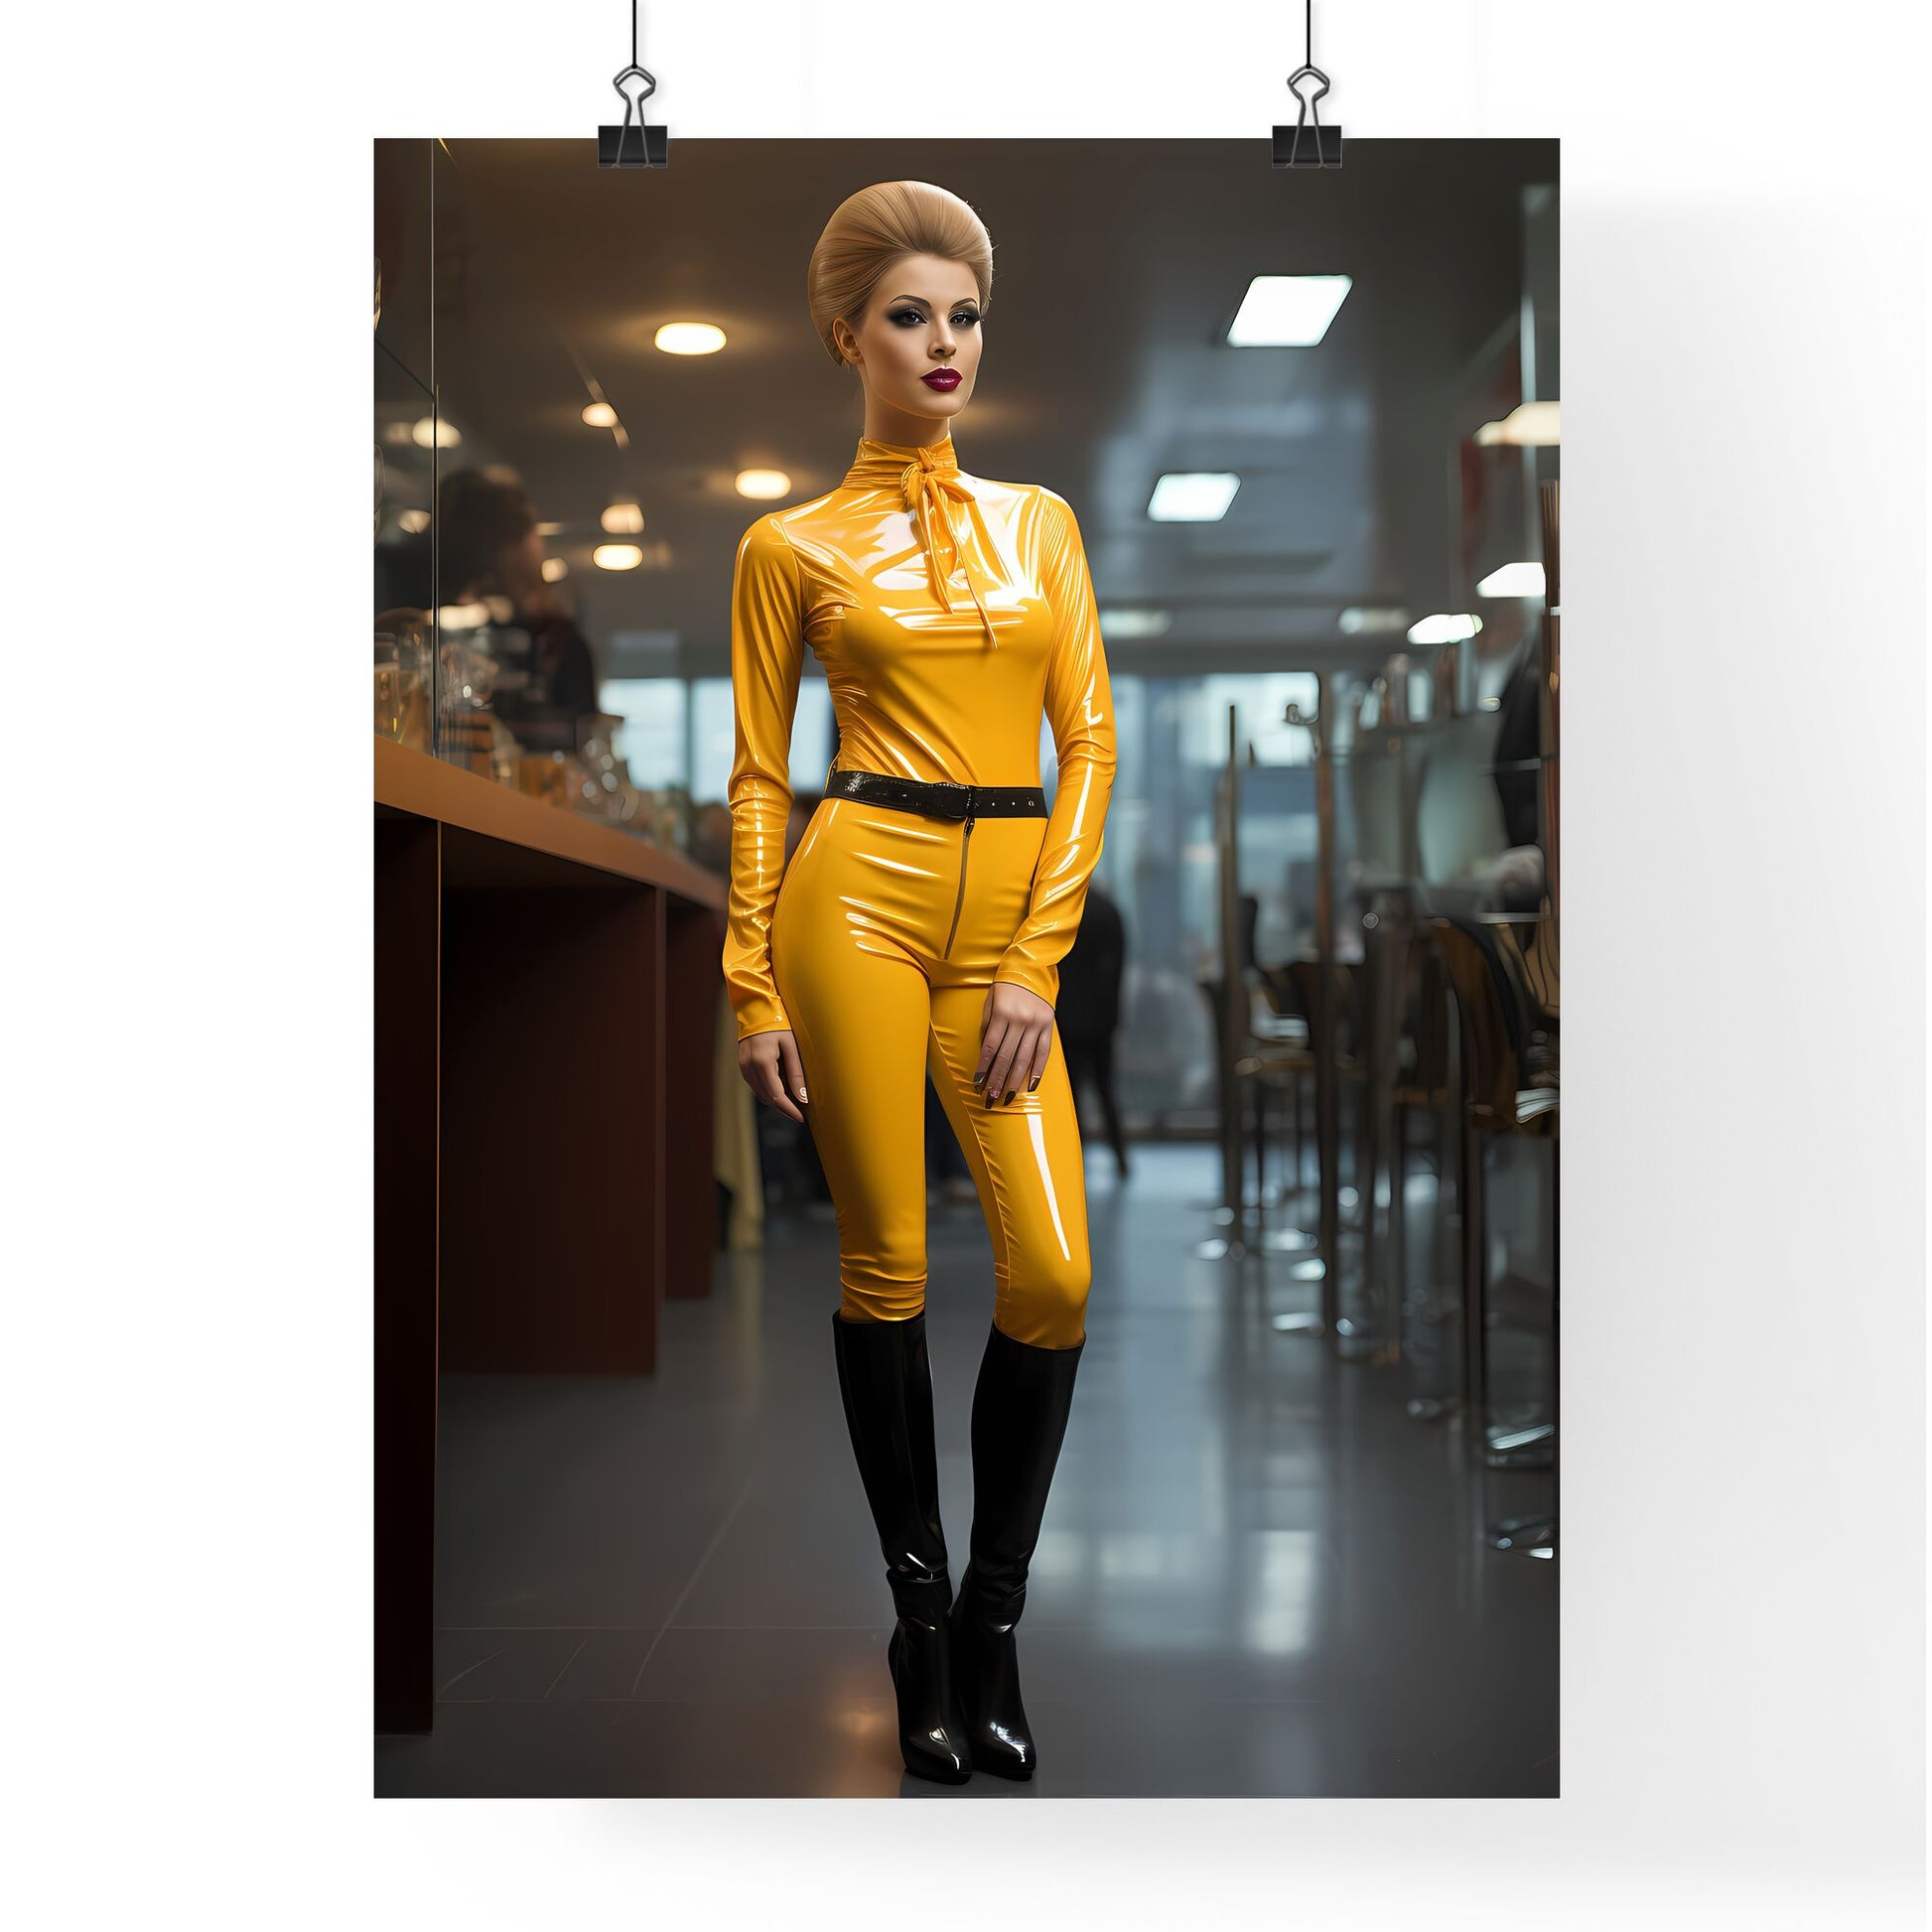 A Poster of beautiful upright standing lady - A Woman In A Yellow Latex Suit Default Title